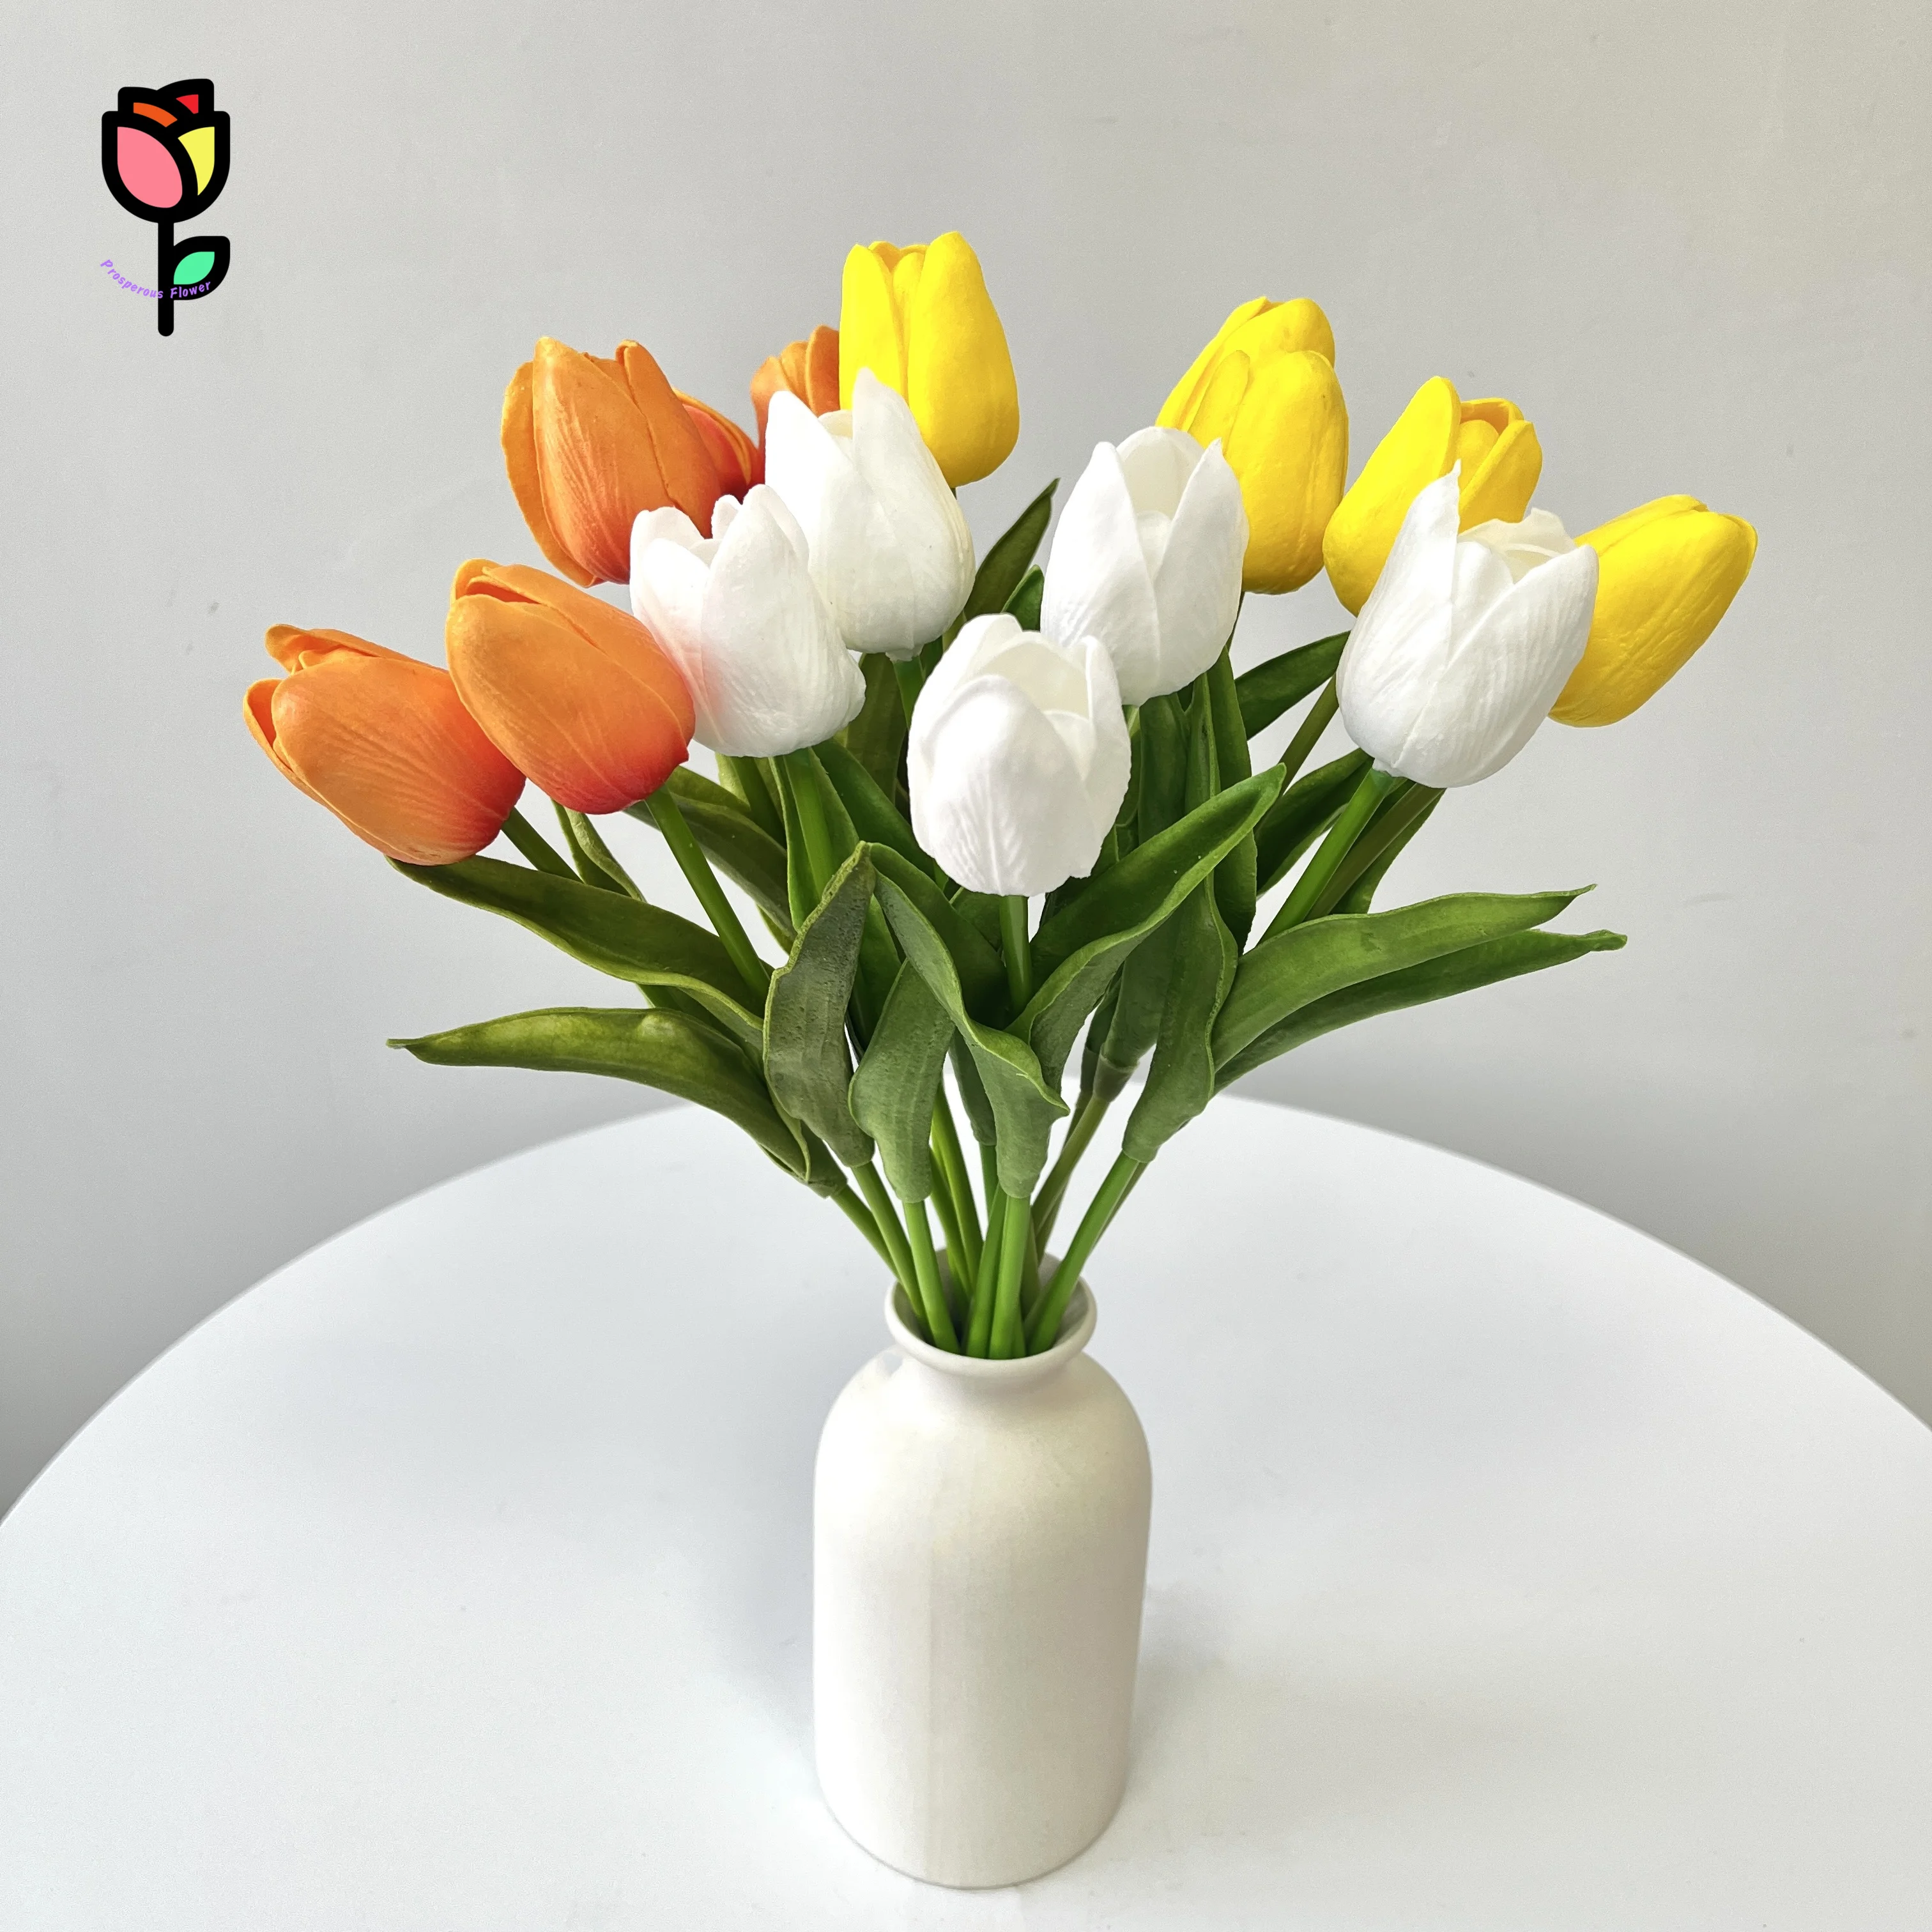 

15pcs Artificial Tulips Flowers Three Colors mixed Bouquet Home Decoration Faux Real Touch Tulip Vase Decor Photography Props